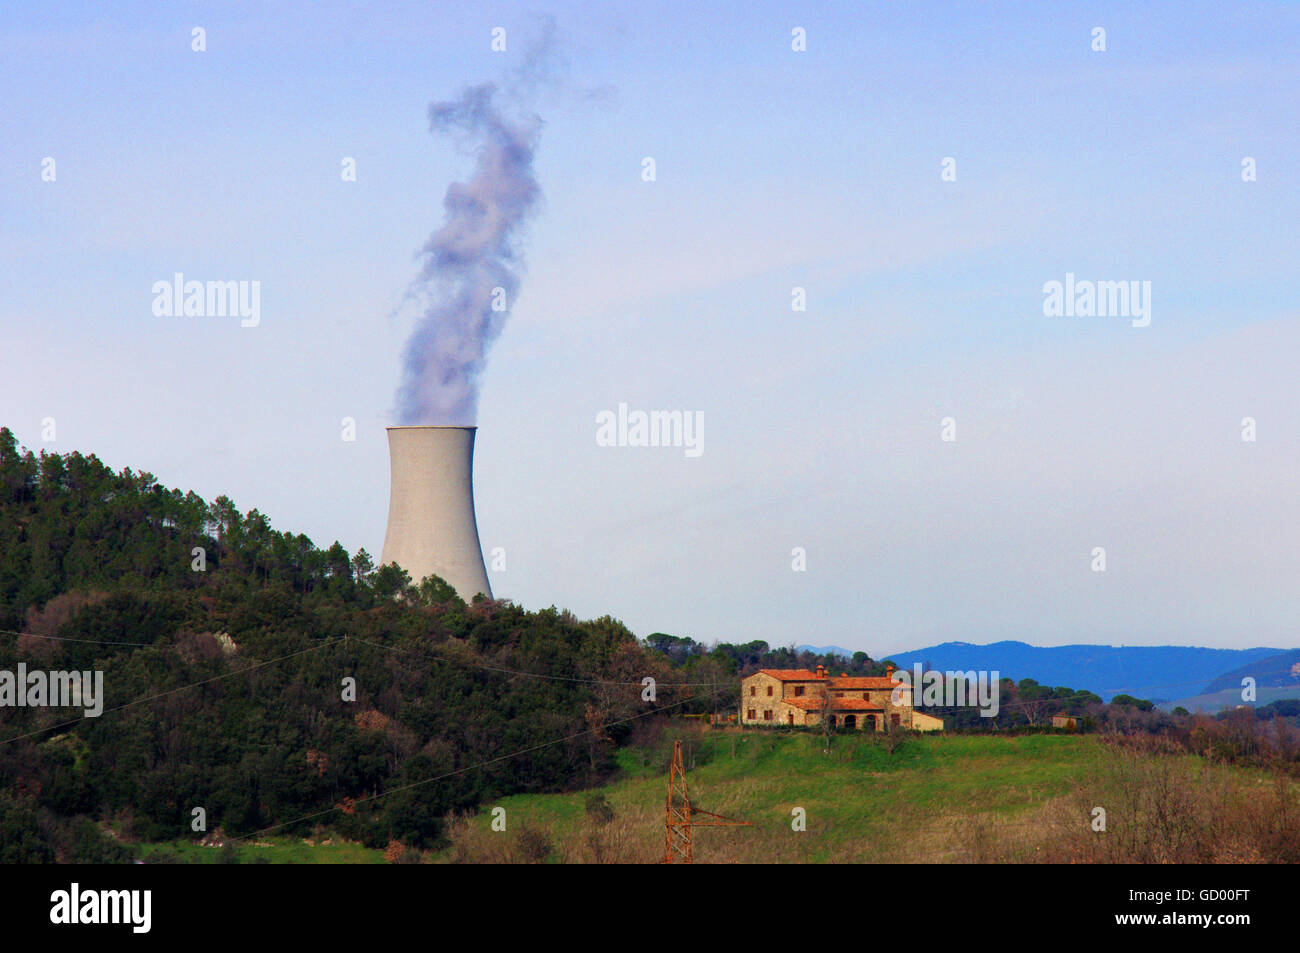 Cooling towers of geothermal plants in the countryside cultivated erificio rural historic Stock Photo